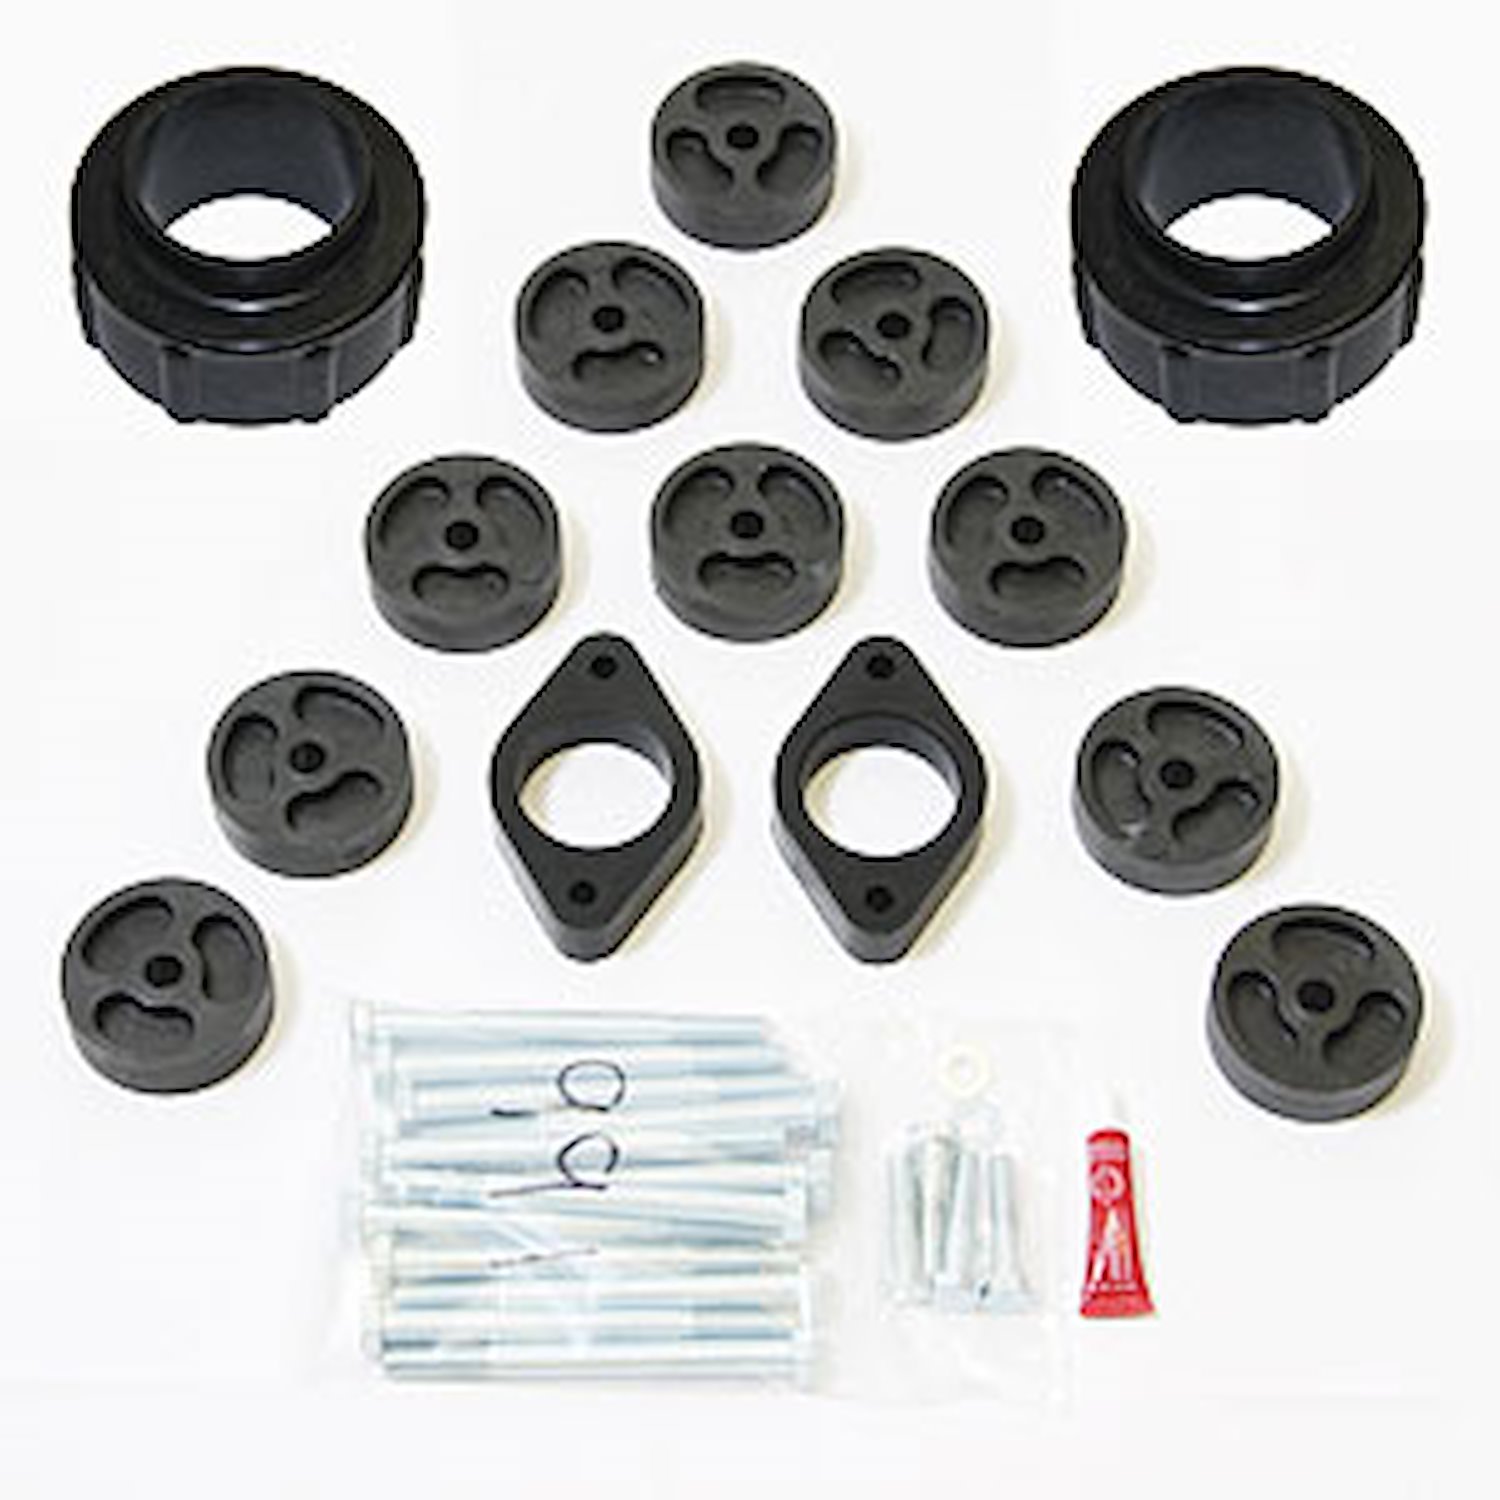 PAPLS992 Front Suspension Lift Kit, Lift Amount: 3 in. Front